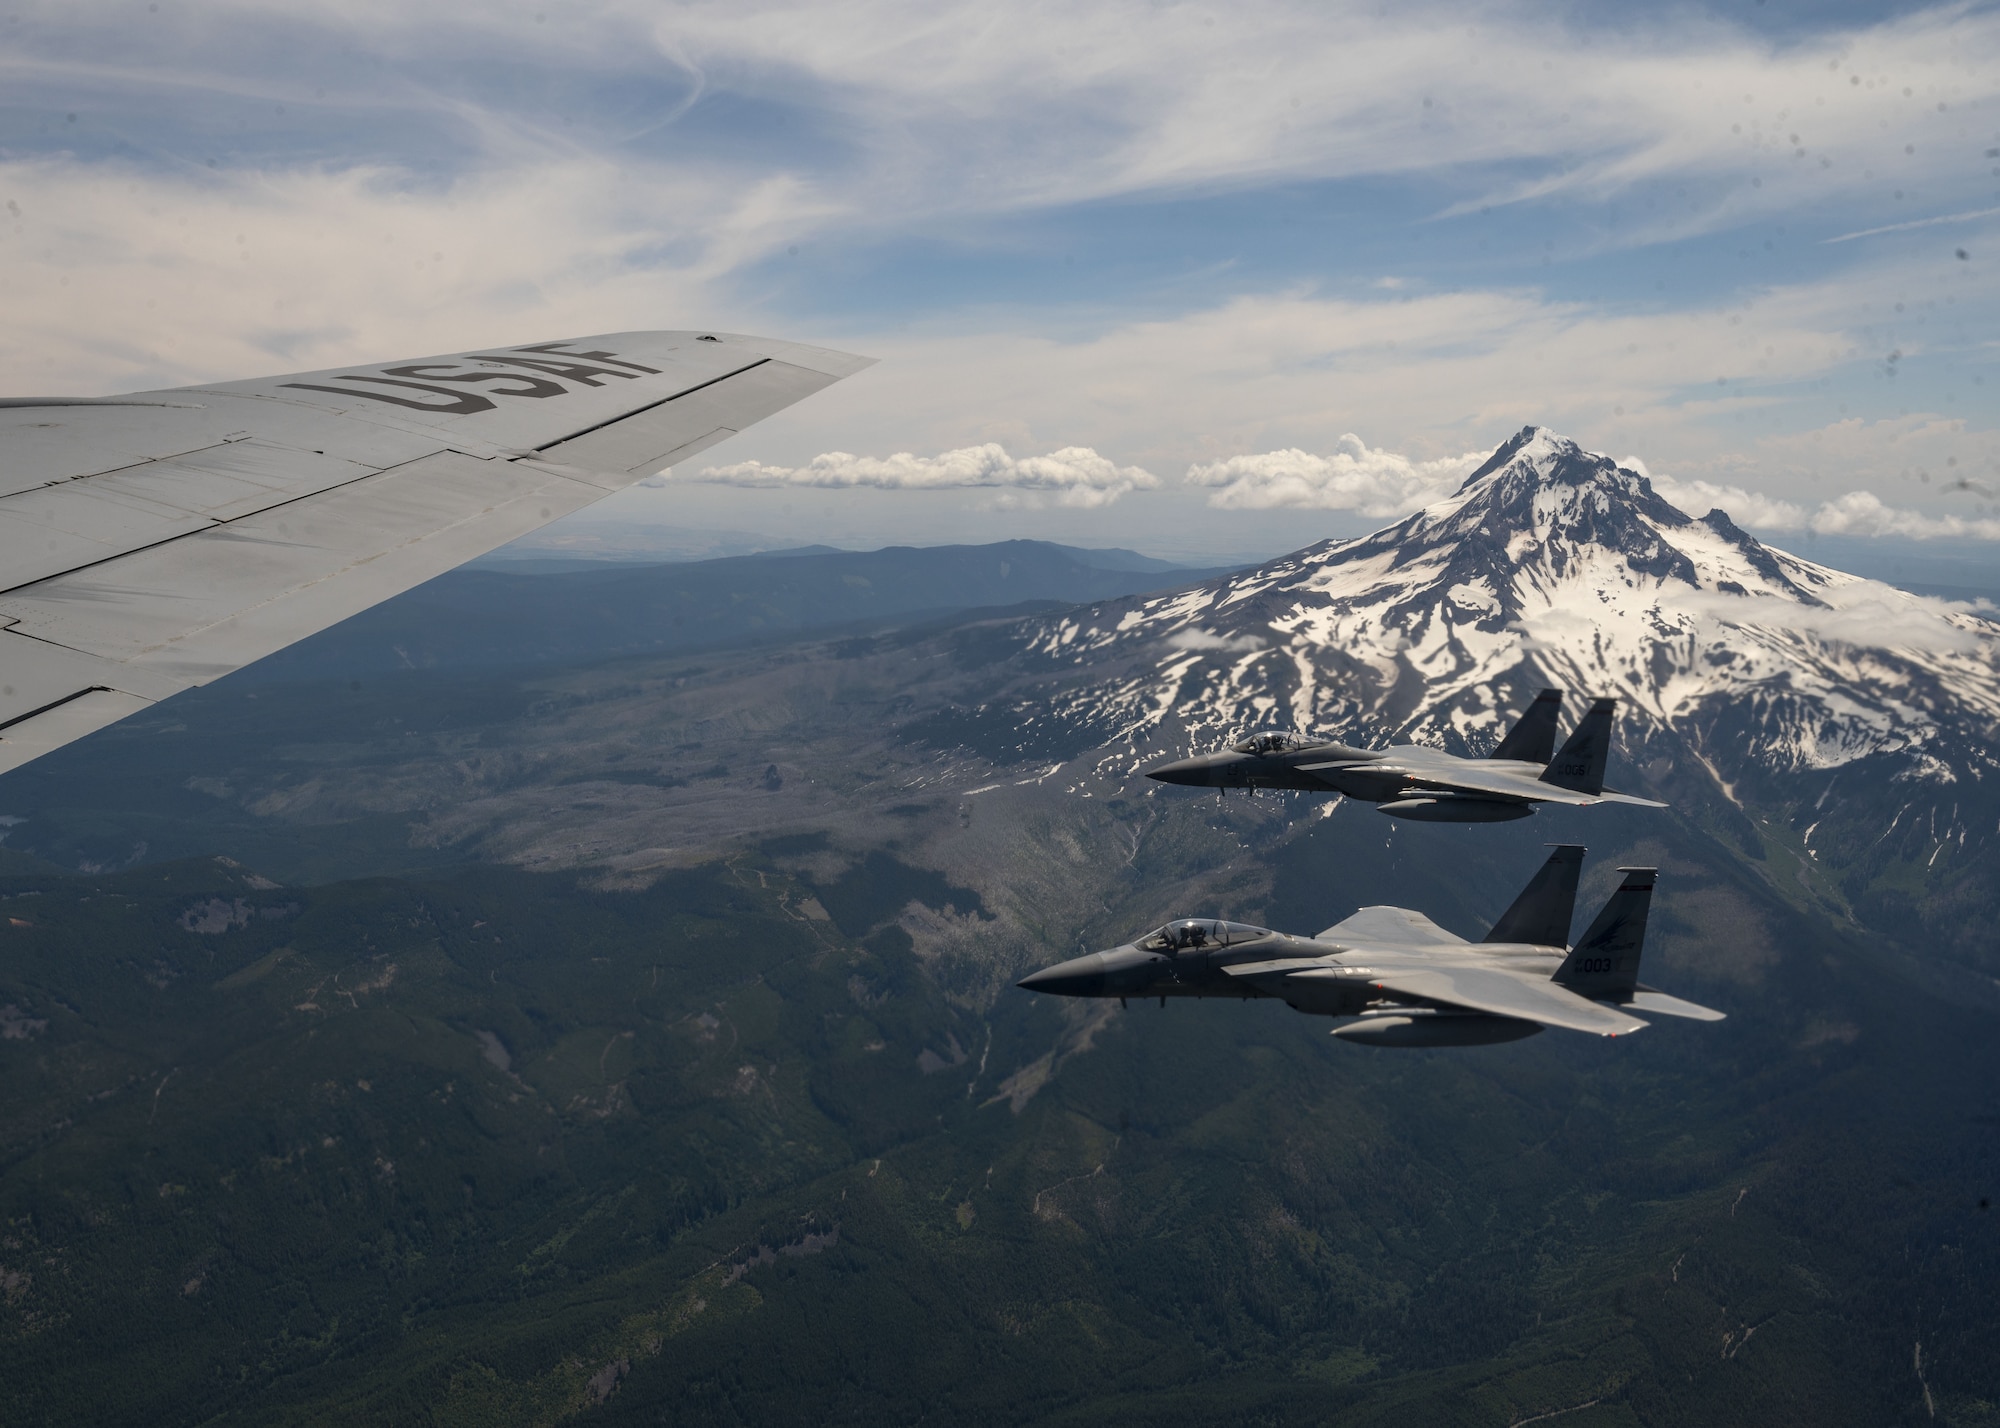 F-15C Eagles fly near a KC-135 Stratotanker assigned to the 92nd Air Refueling Wing over Mount Hood in Oregon as part of Operation Centennial Contact June 27, 2023. The movement, which also included flights over Yellowstone National Park, Mount Rushmore and Glacier National Park, was part of Air Mobility Command’s celebration of 100 years air refueling operations and demonstrated the 92nd Air Refueling Wing’s global reach capabilities. Since its inception in 1923, air refueling has become a crucial component of military and civilian aviation operations around the world by extending the range and endurance of aircraft and enabling them to complete missions that would otherwise be impossible or require multiple stops. As a result, this capability is essential for strategic and tactical operations, as well as humanitarian relief efforts in support of AMC, U.S. Transportation Command and Department of Defense priorities. (U.S. Air Force photo by Staff Sgt. Lawrence Sena)